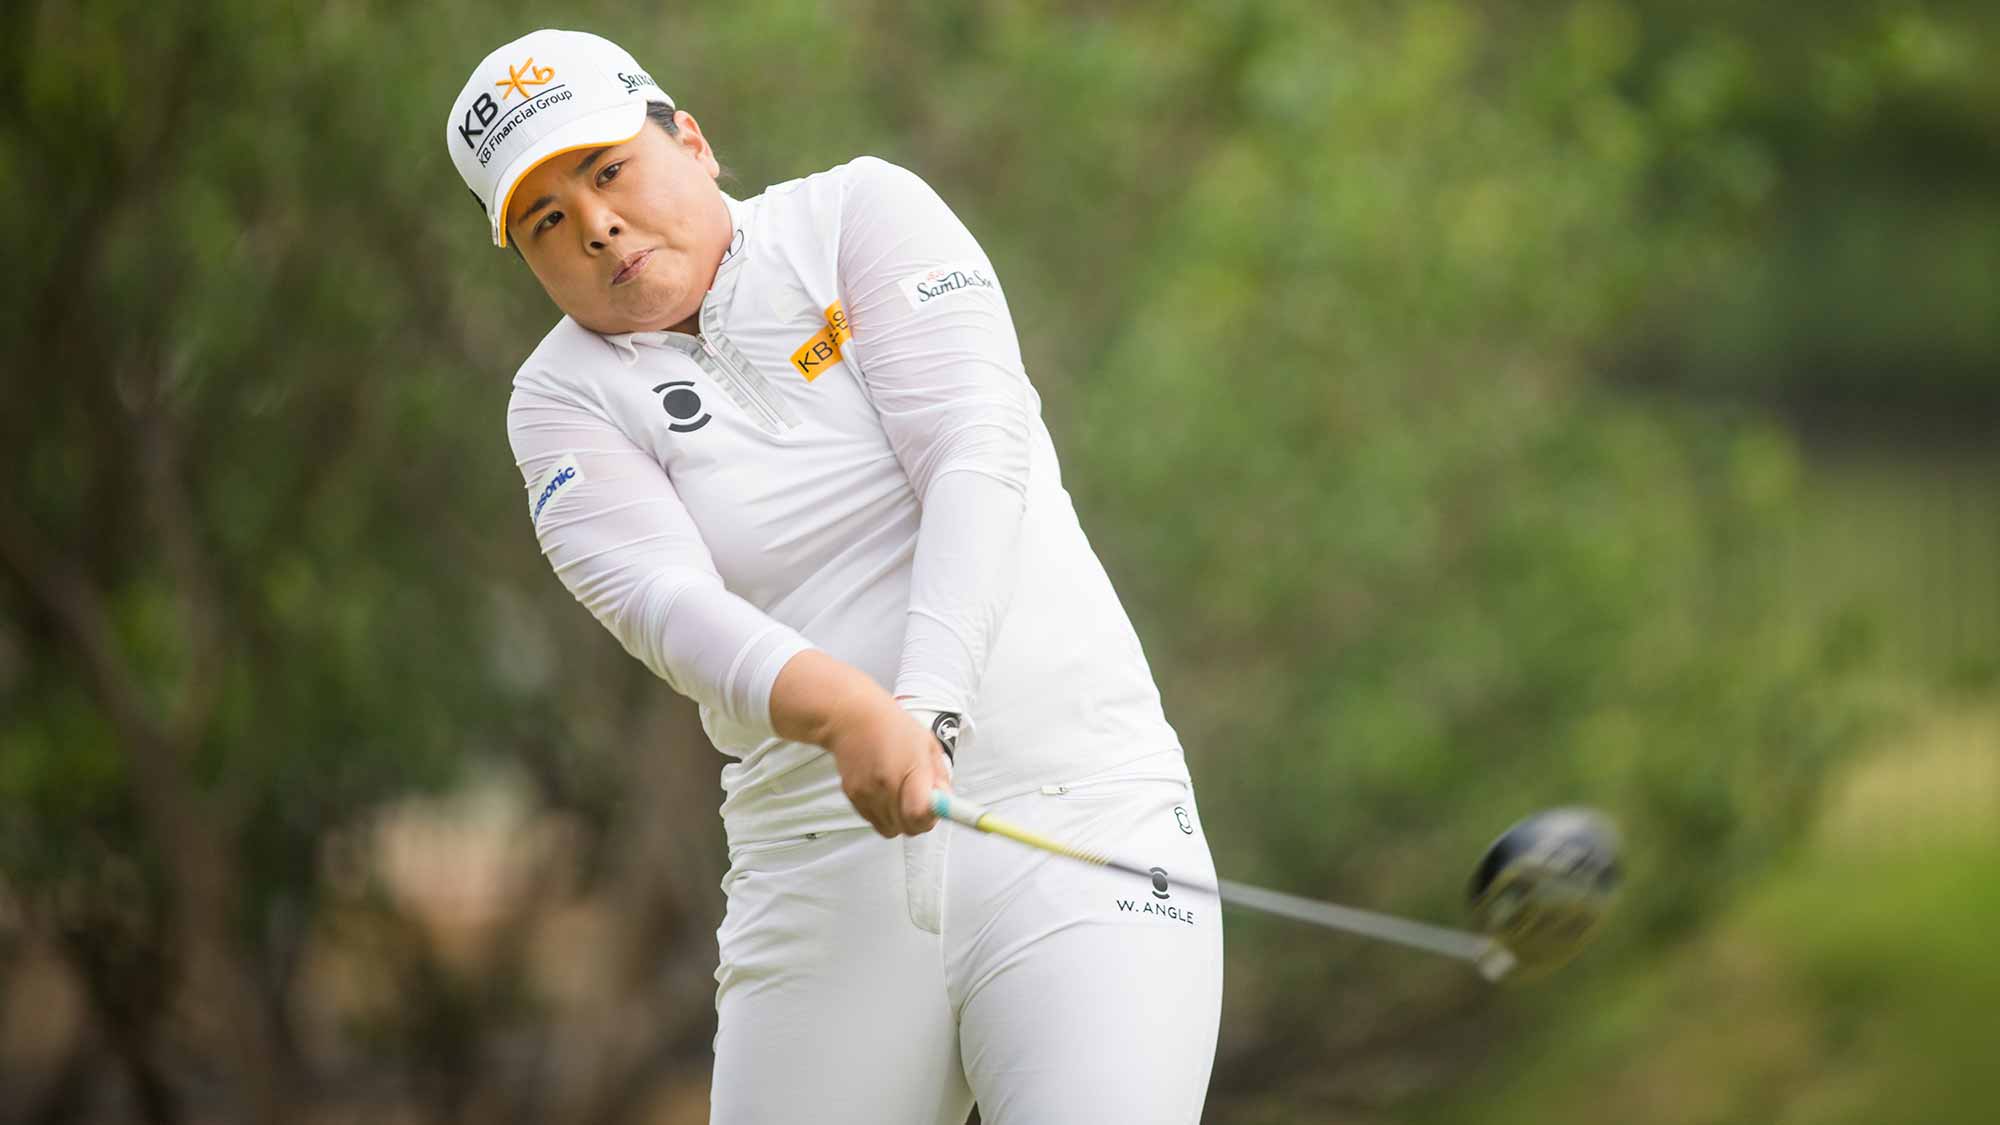 Inbee Park of South Korea plays a tee shot at the second hole during the second round of the Volunteers of America Texas Shootout